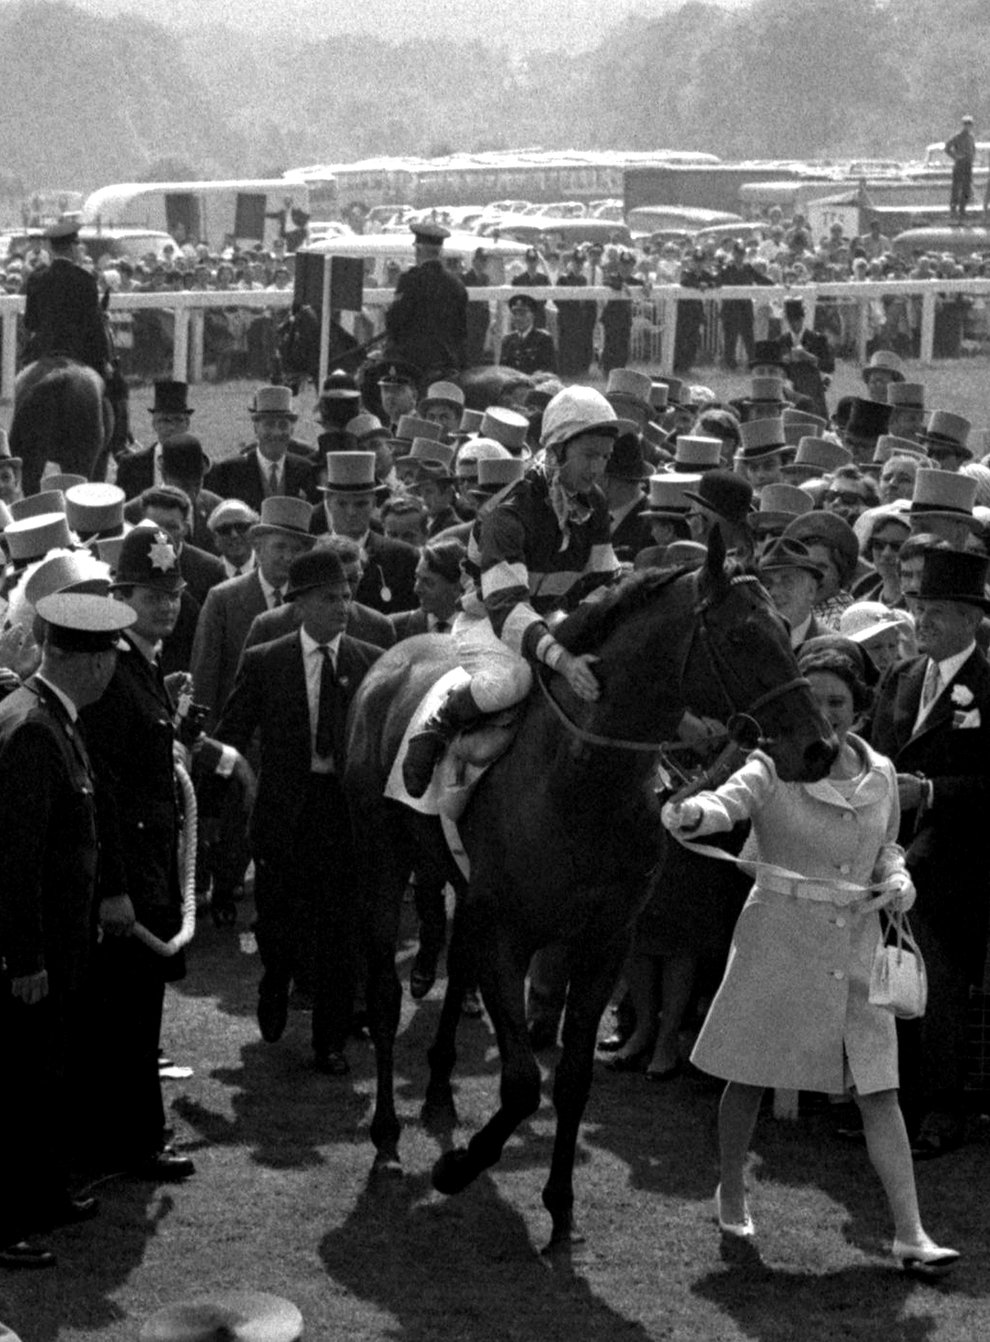 Sir Ivor are Lester Piggott are led in after winning the 1968 Derby (PA)